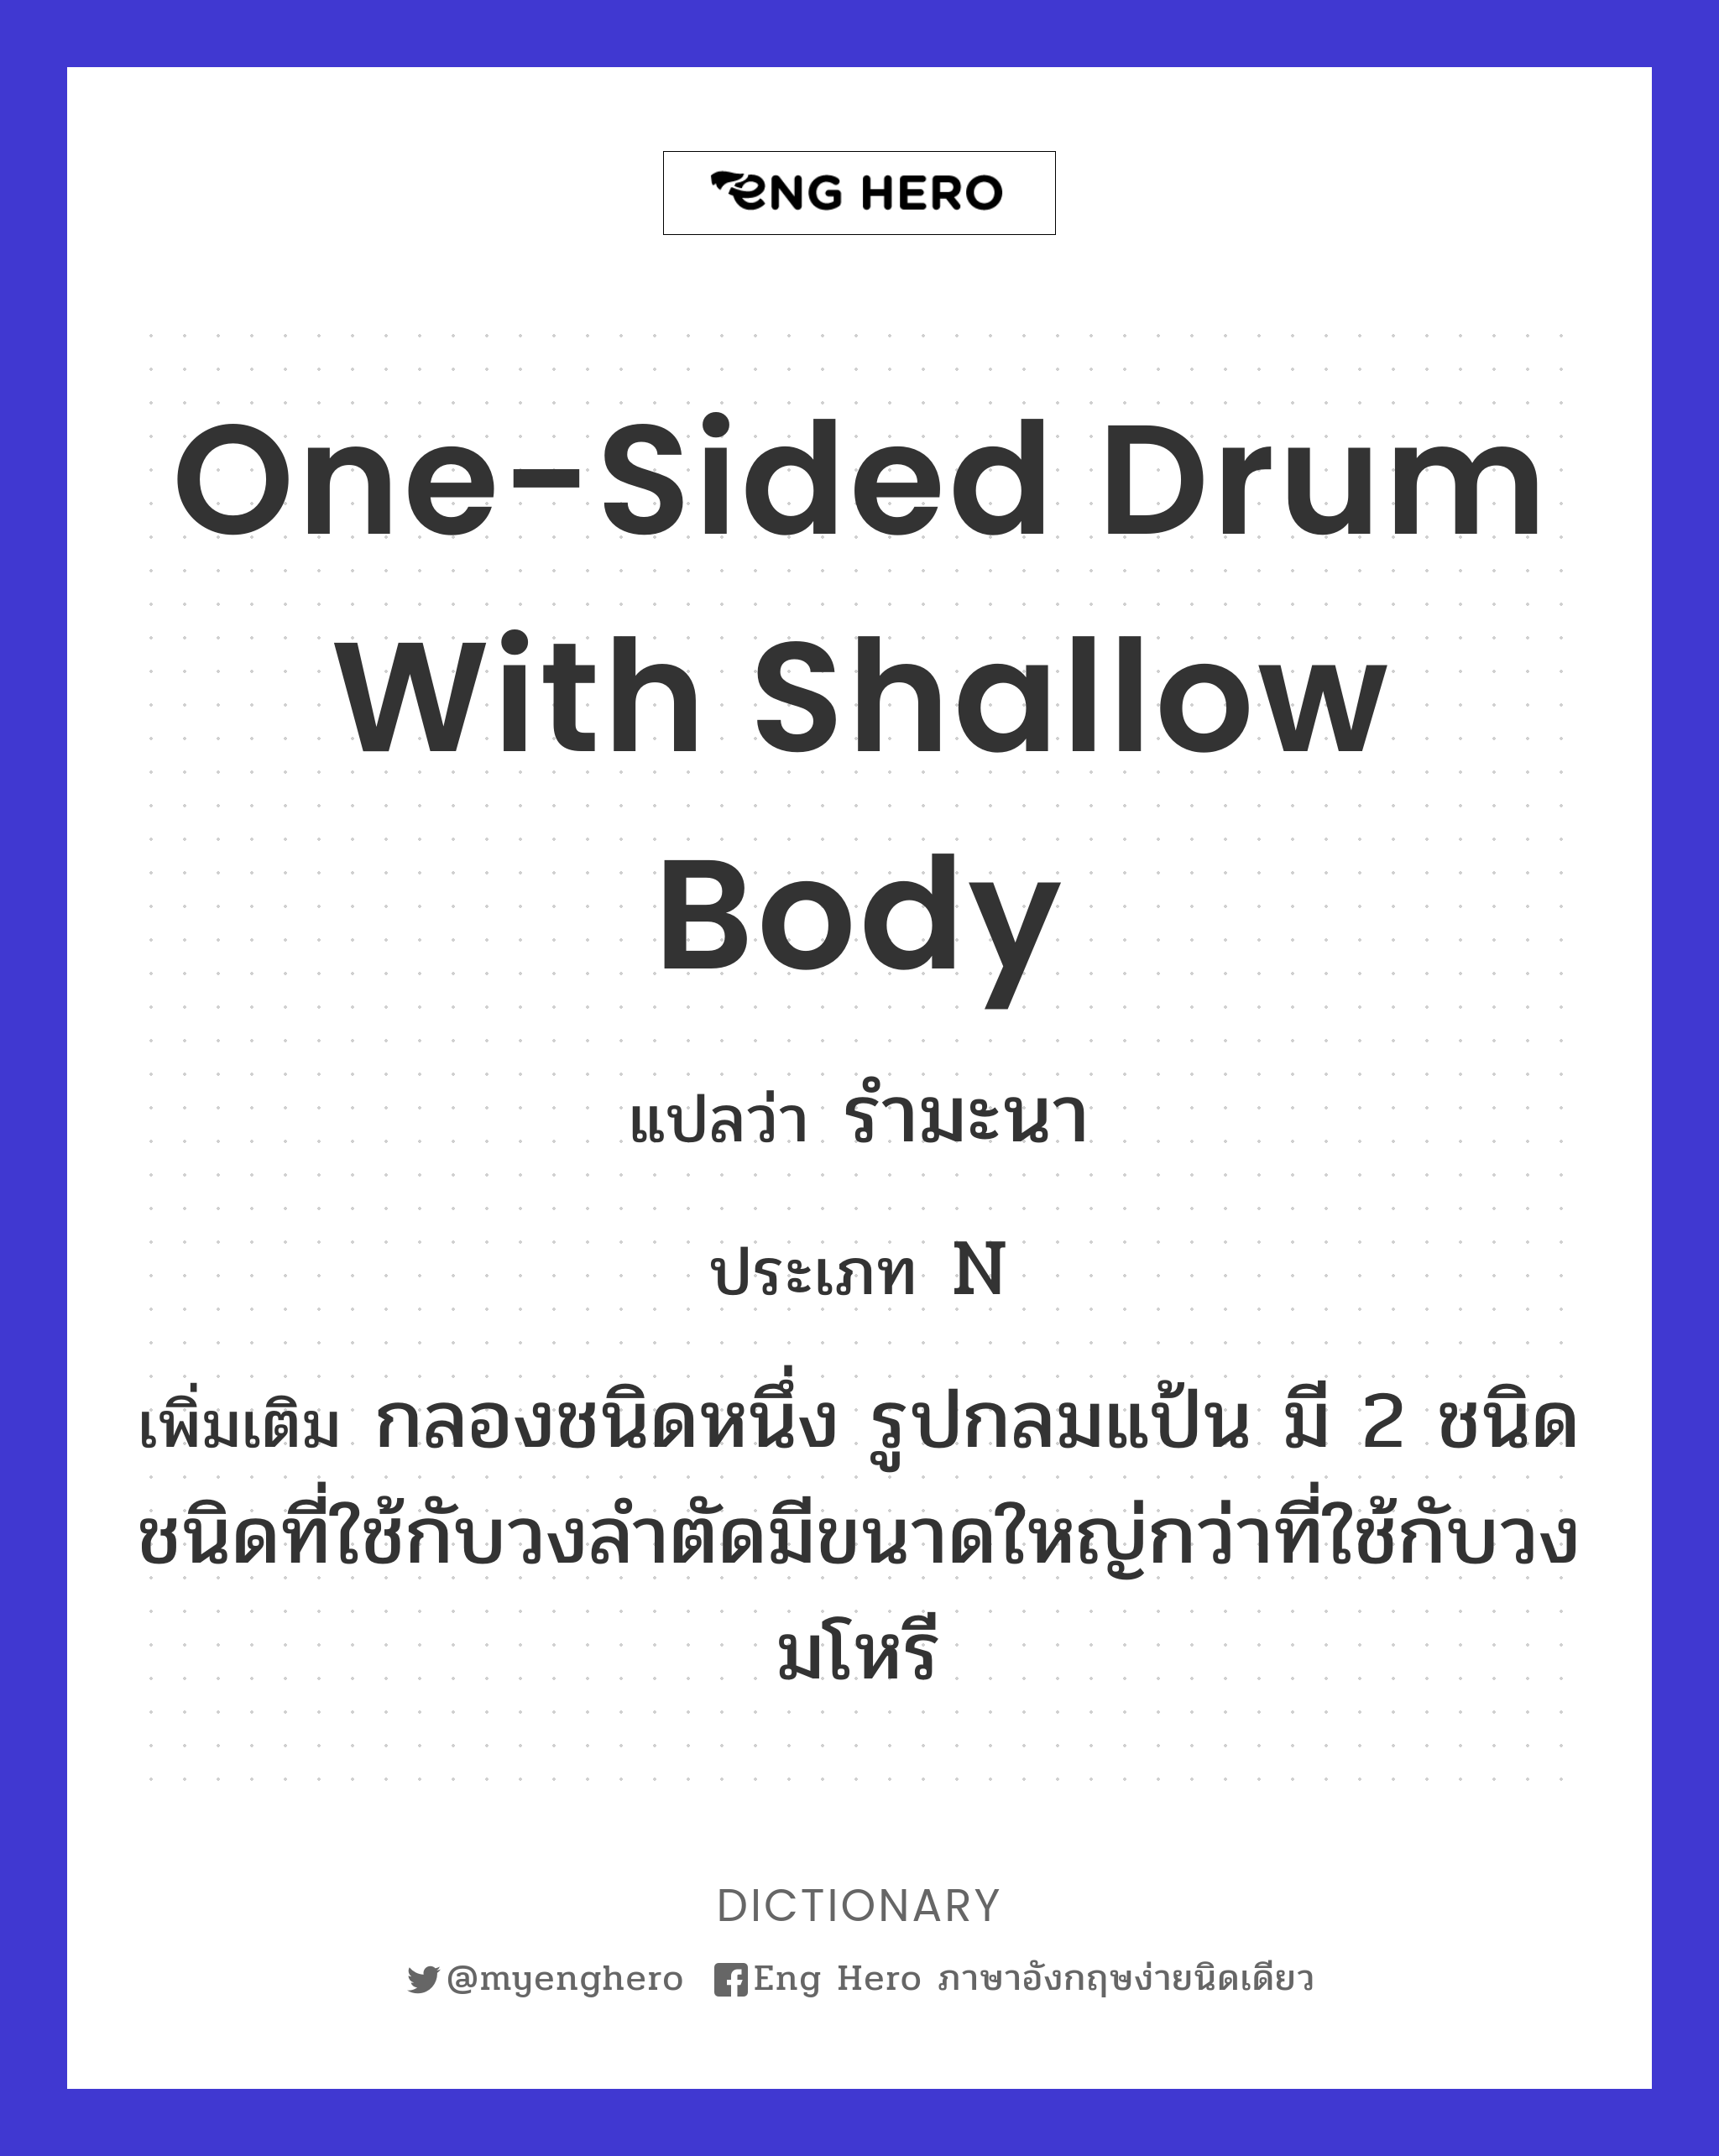 one-sided drum with shallow body